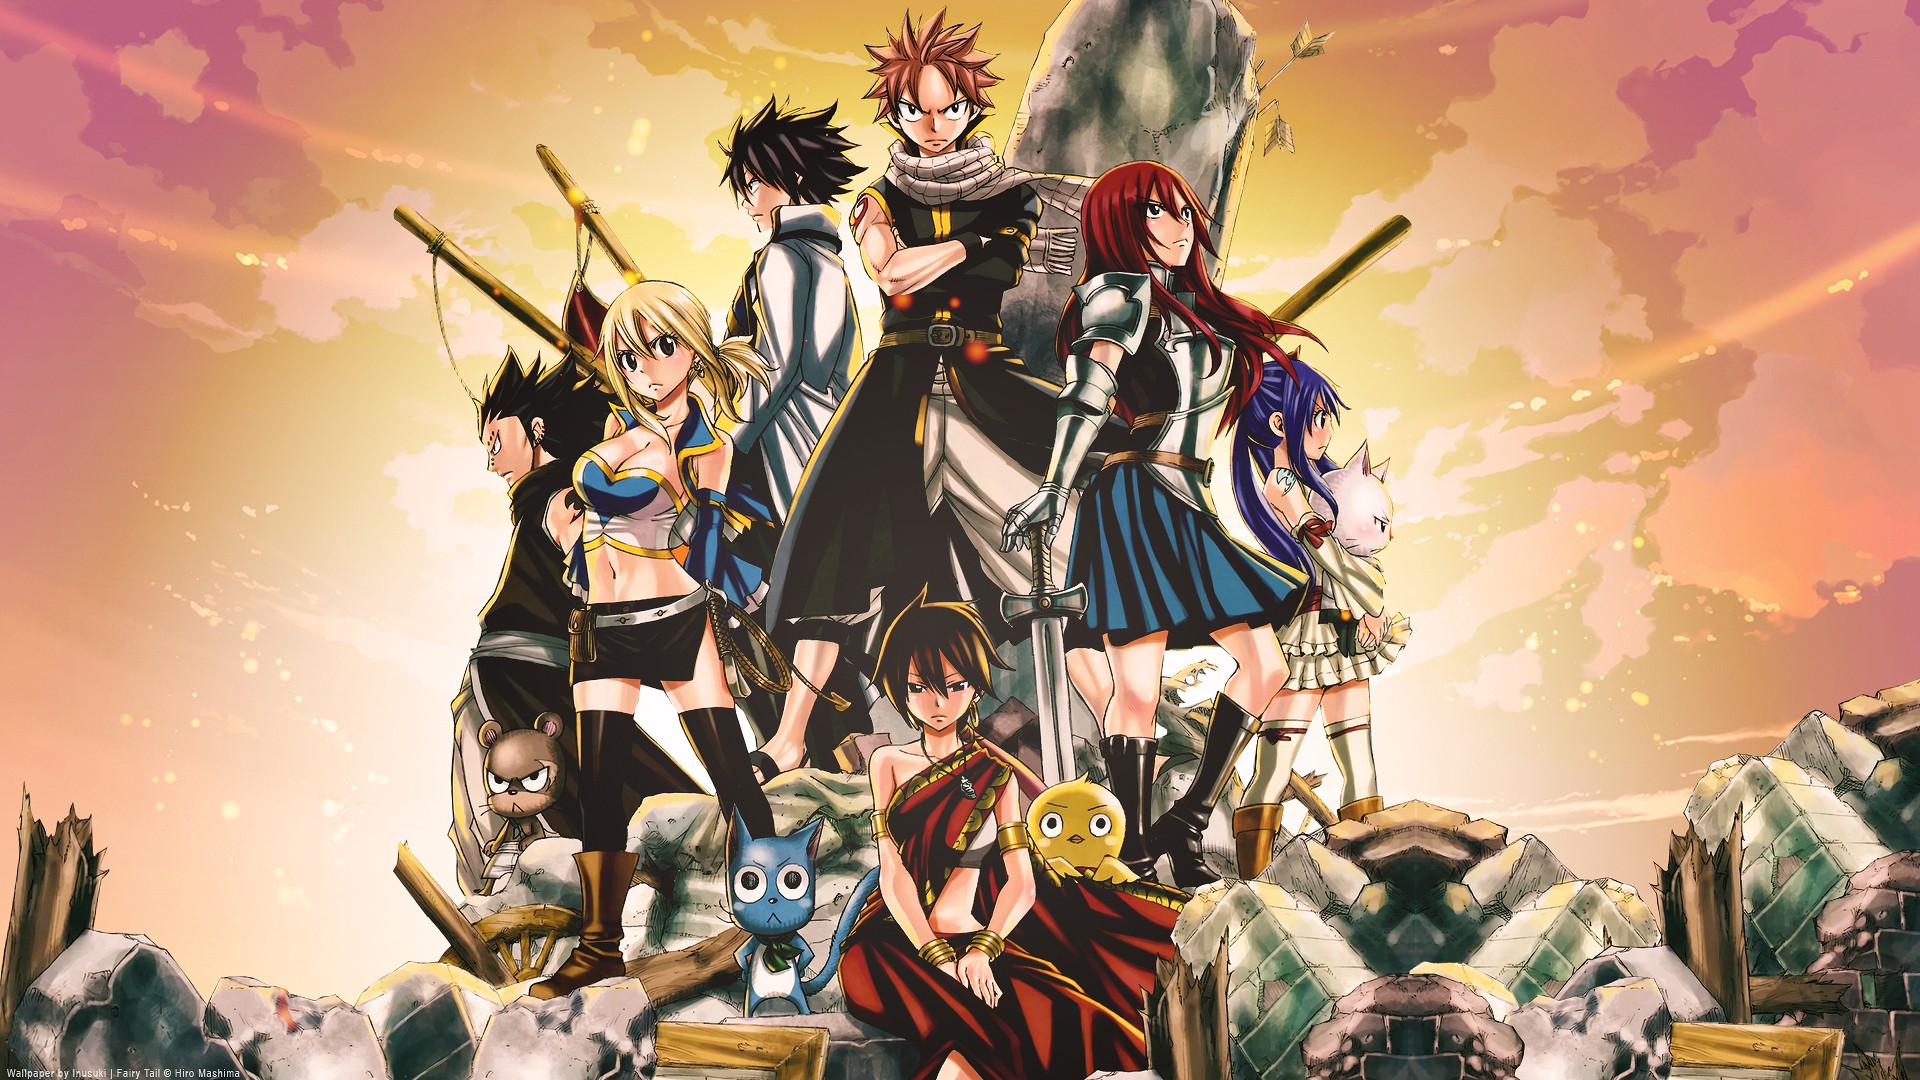 Fairy Tail Dragneel Natsu Scarlet Erza Heartfilia Lucy Fullbuster Gray Marvell Wendy Gajeel Redfox A 1920x1080